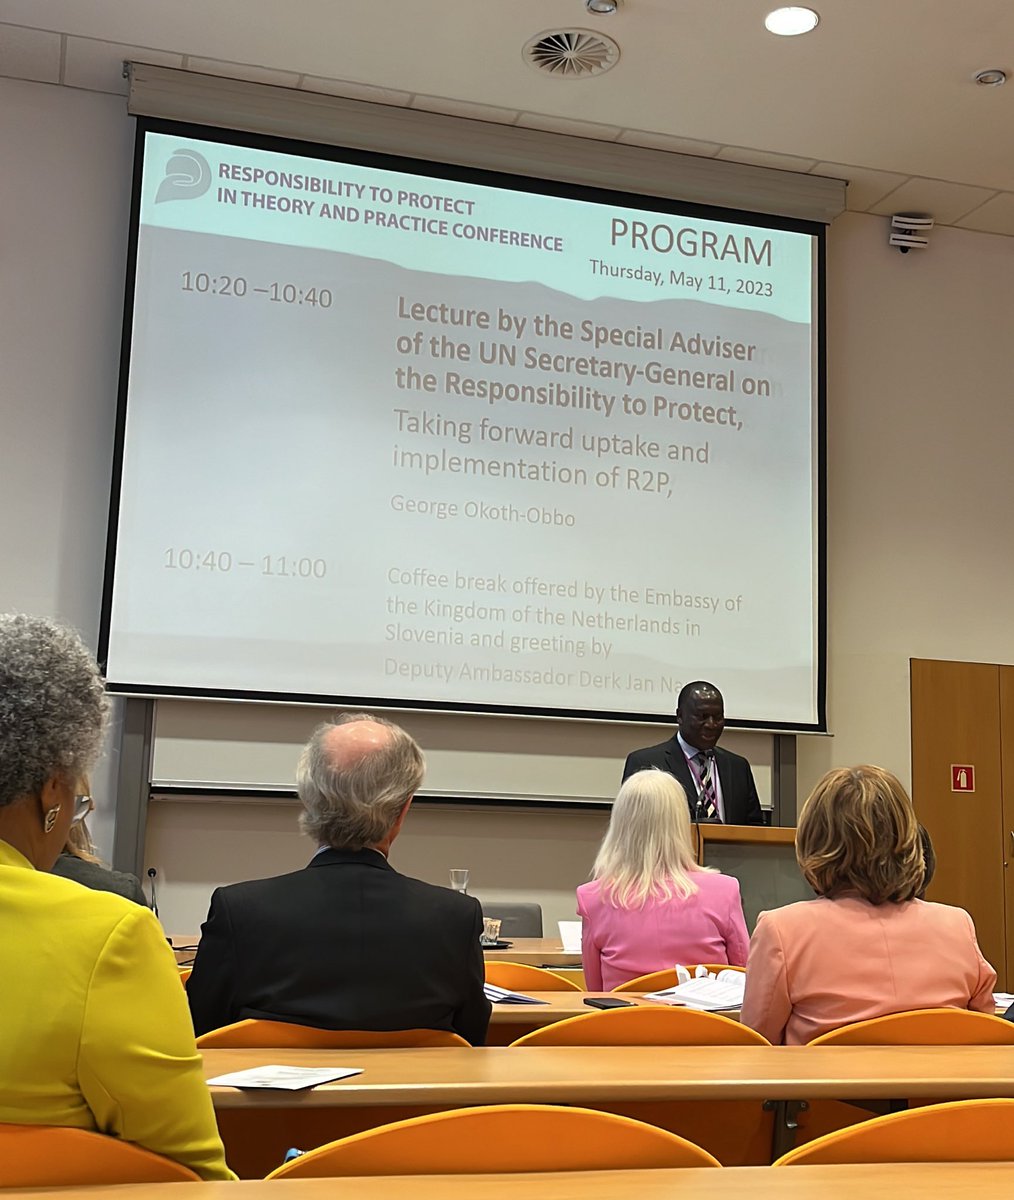 Following 🇸🇮 President @nmusar and Foreign Minister @tfajon, UN Special Adviser @GeorgeOkothObbo addresses the opening session of the 6th R2P in Theory and Practice Conference, in its 10th anniversary

The University of Ljubljana will host 2 days of interesting discussions on R2P